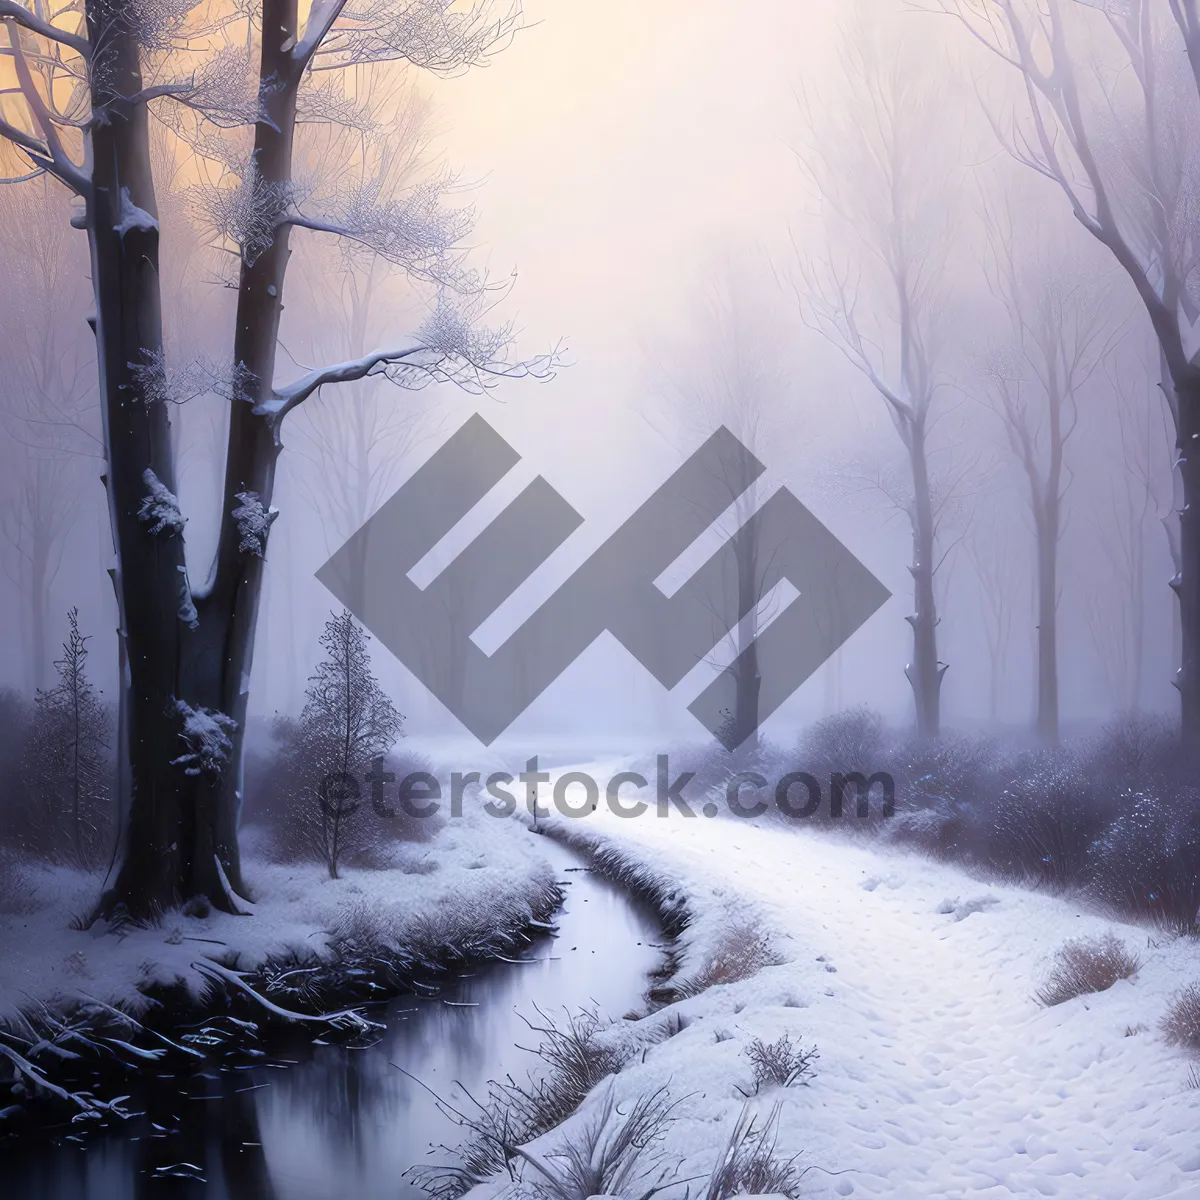 Picture of Winter Wonderland: Serene Forest Landscape with Snow-Covered Trees